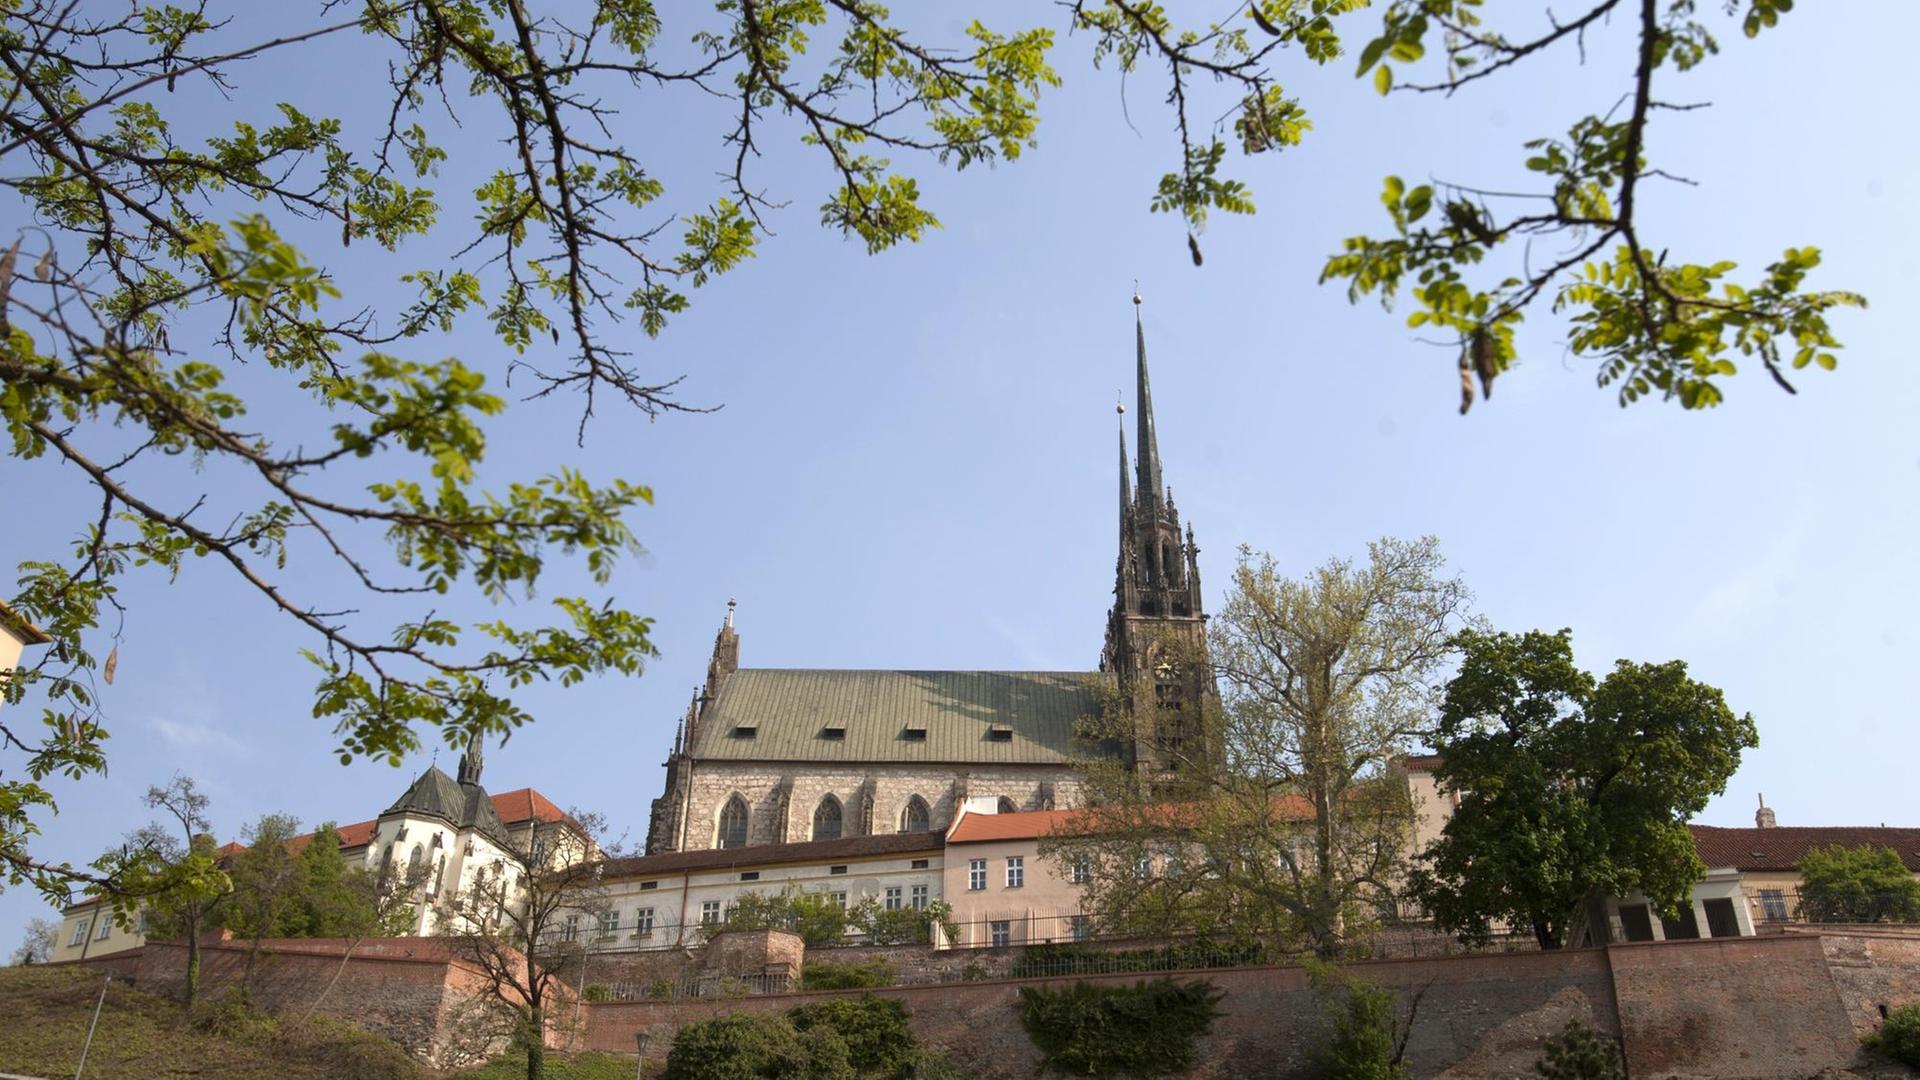 Cathedral of St. Peter and Paul in Brno, Czech Republic. |